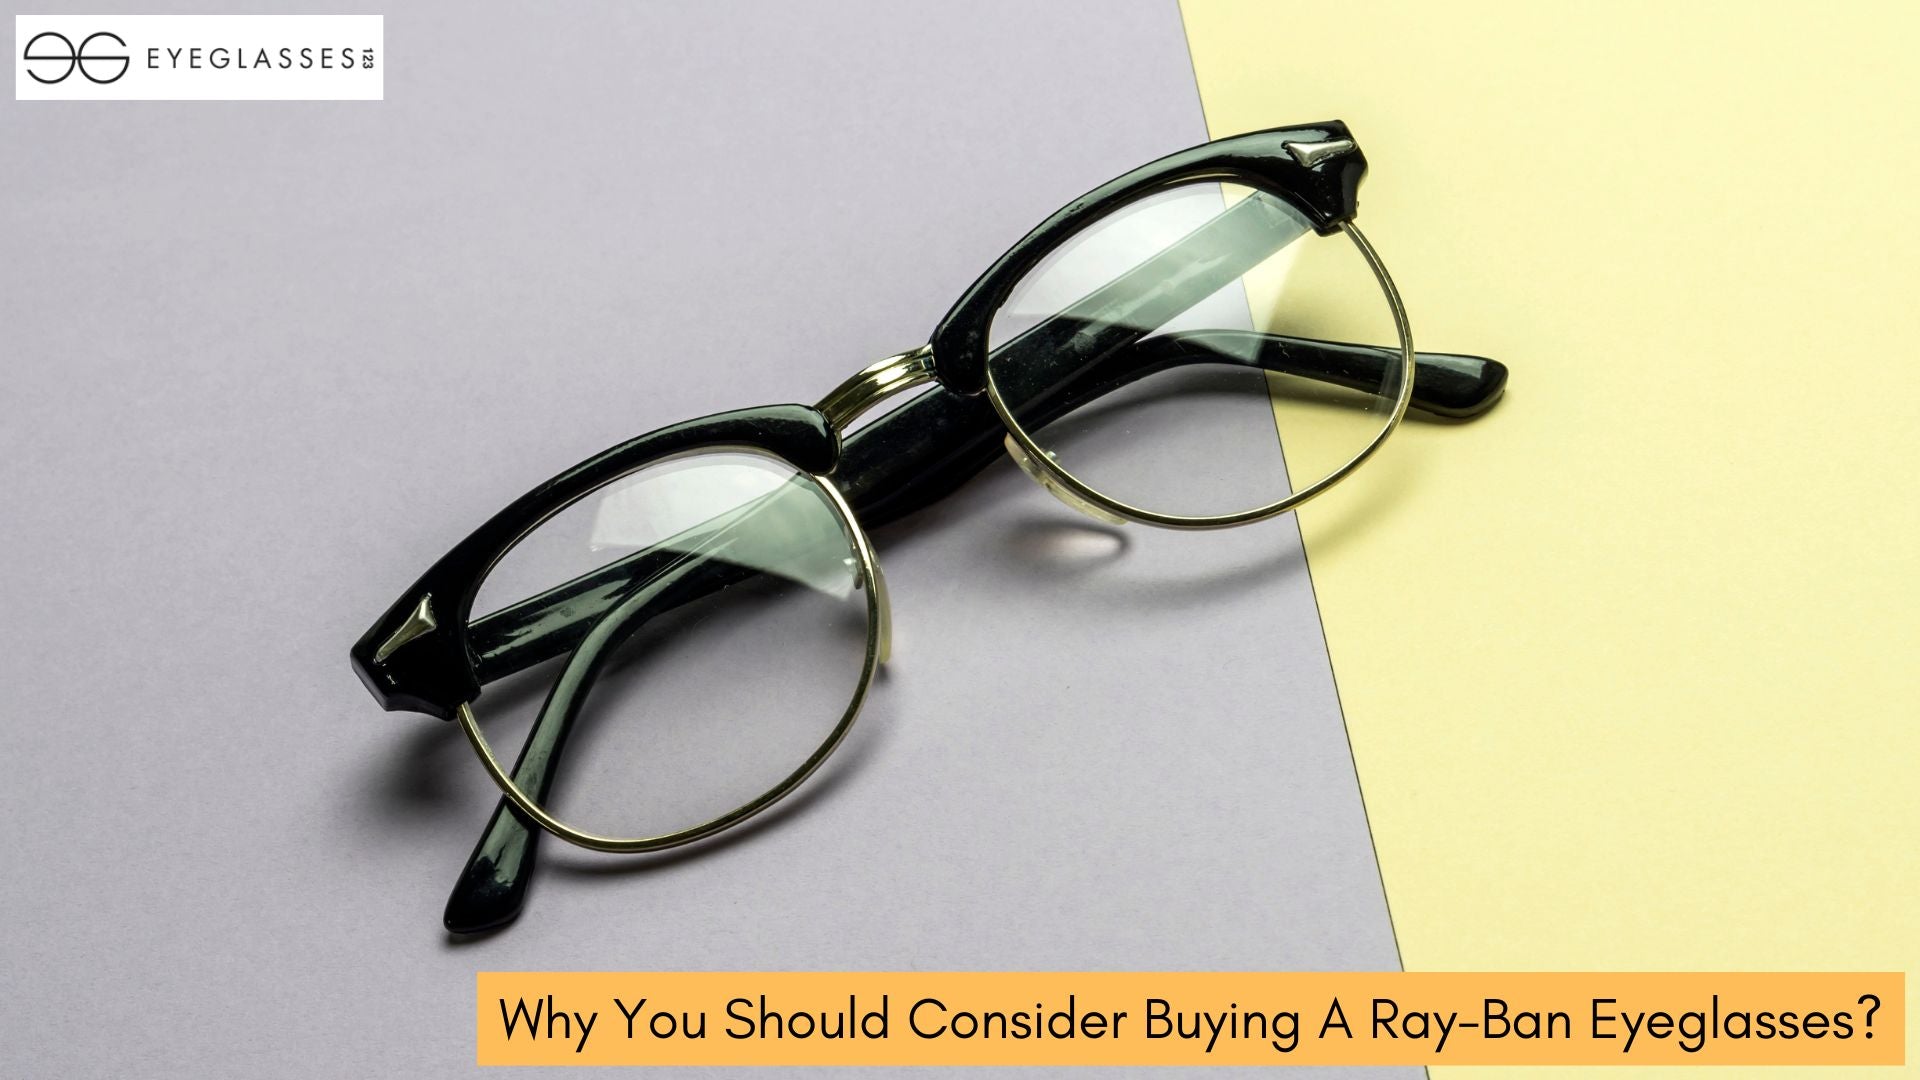 Why You Should Consider Buying A Ray-Ban Eyeglasses?